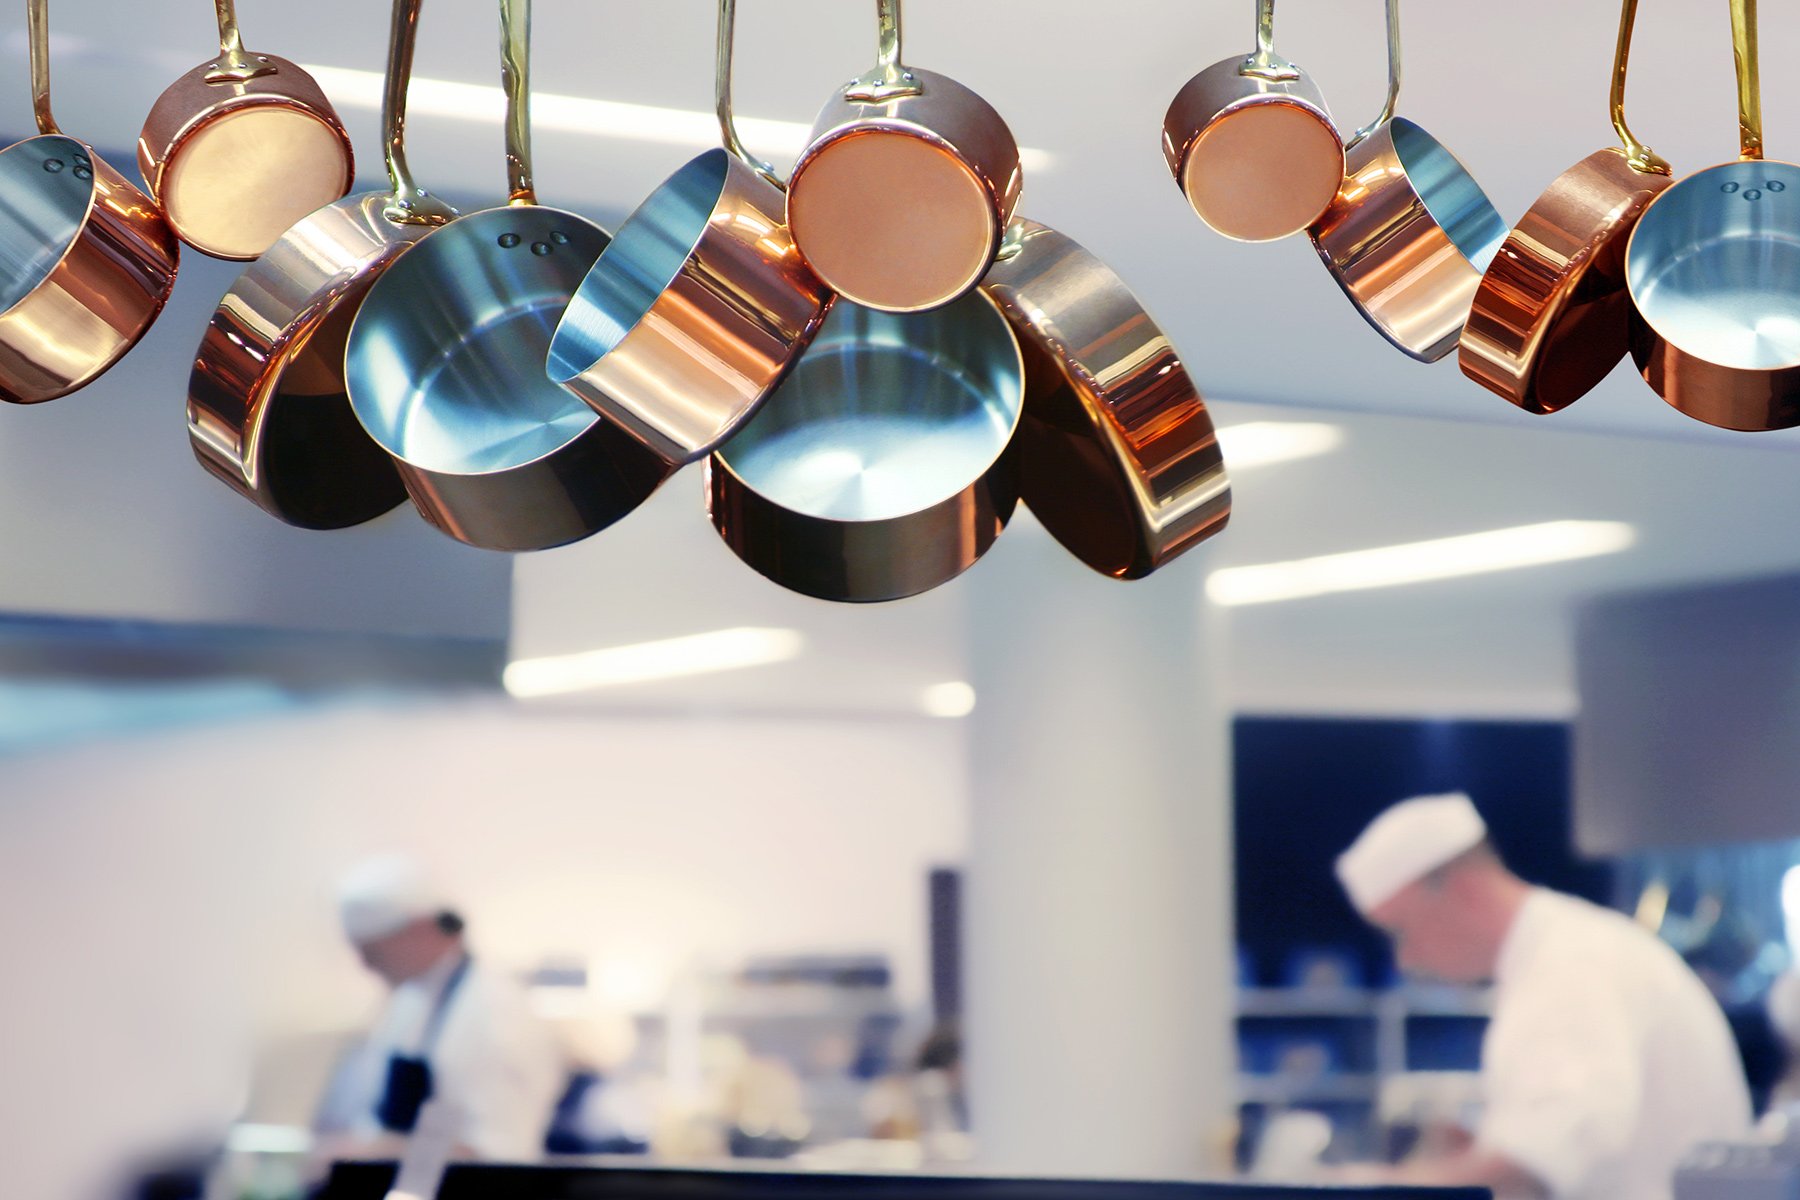 Stainless Steel pots hanging in restaurant kitchen with bokeh background